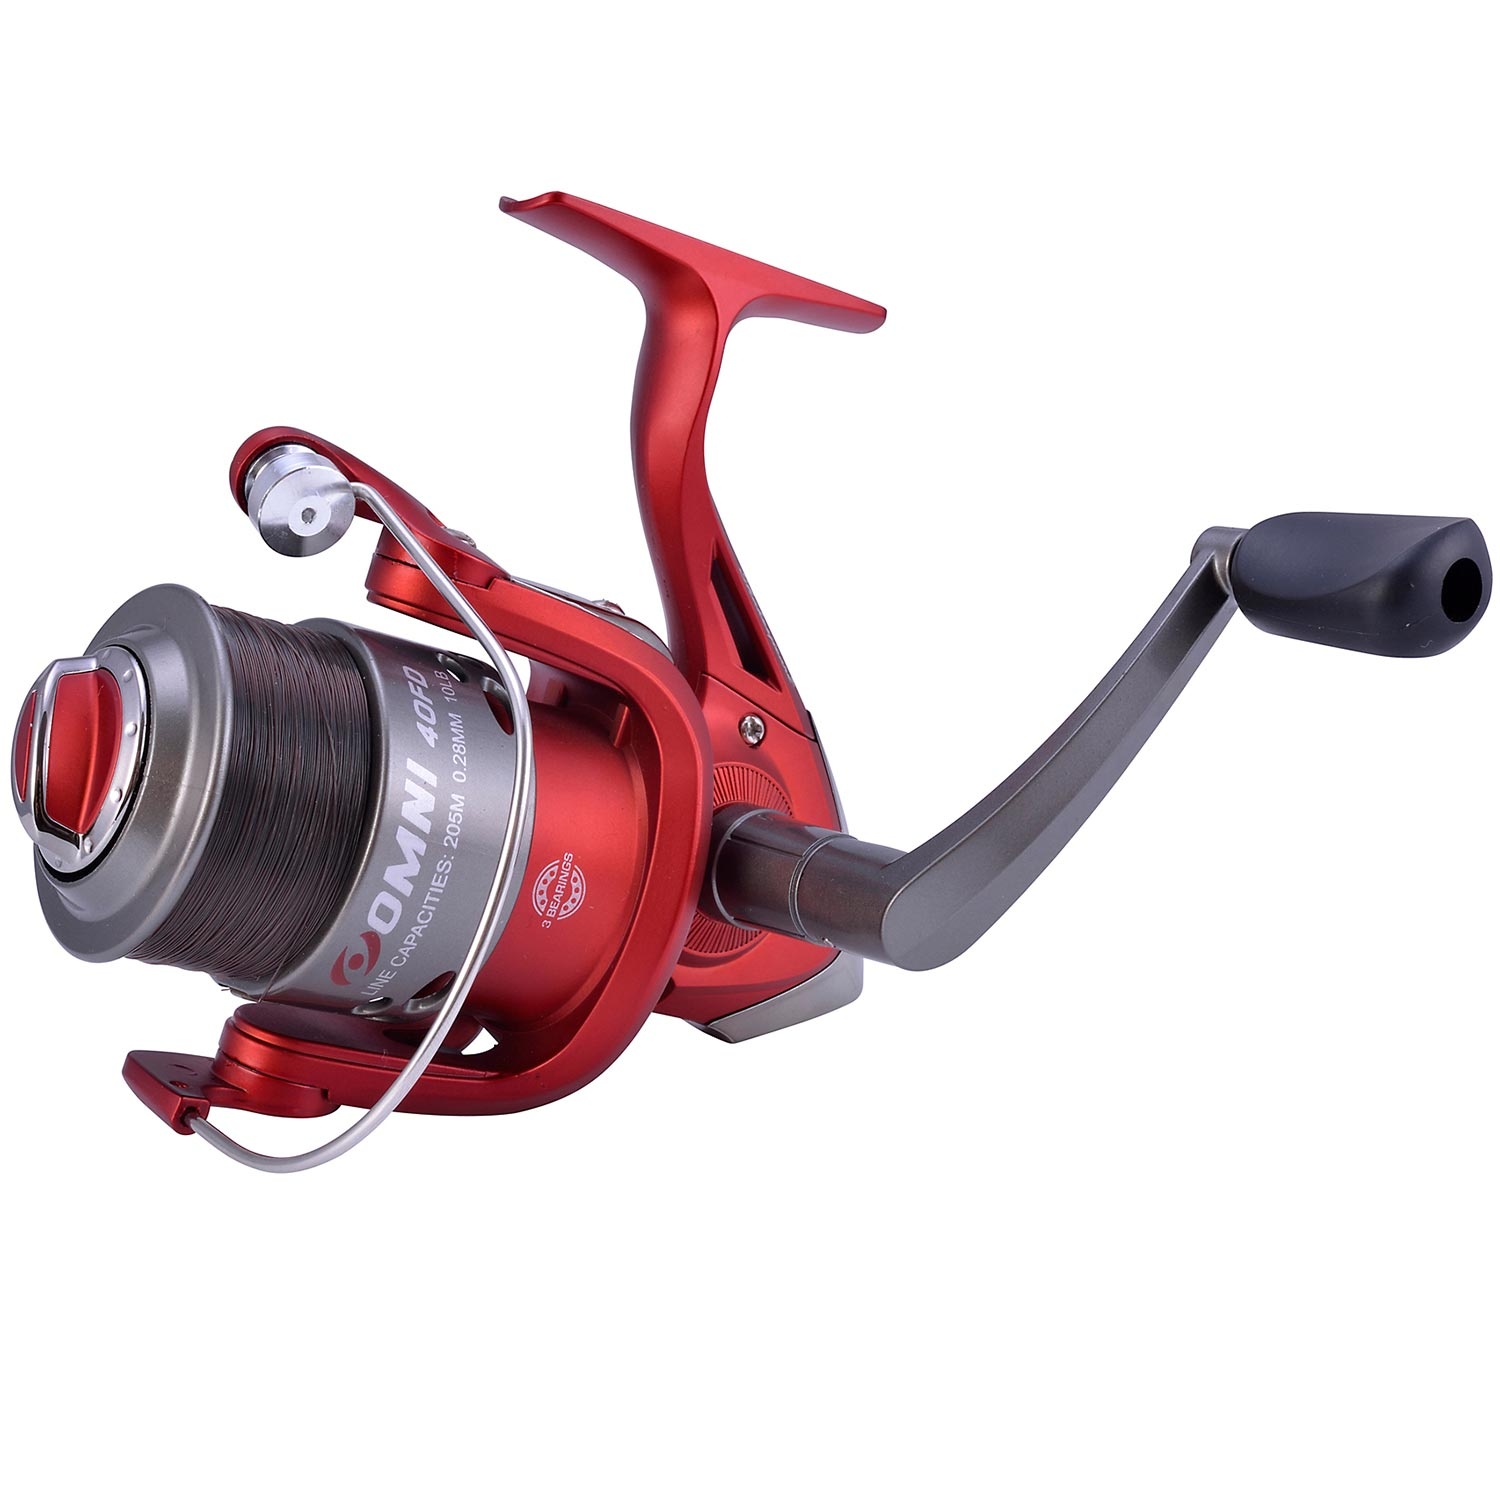 https://cdn.anglingactive.co.uk/media/catalog/product/cache/c7a5695839b539f20c8015776a05748c/s/h/shakespeare_omni_fd_spinning_reel_-_front_drag_fixed_spool_reels.jpg